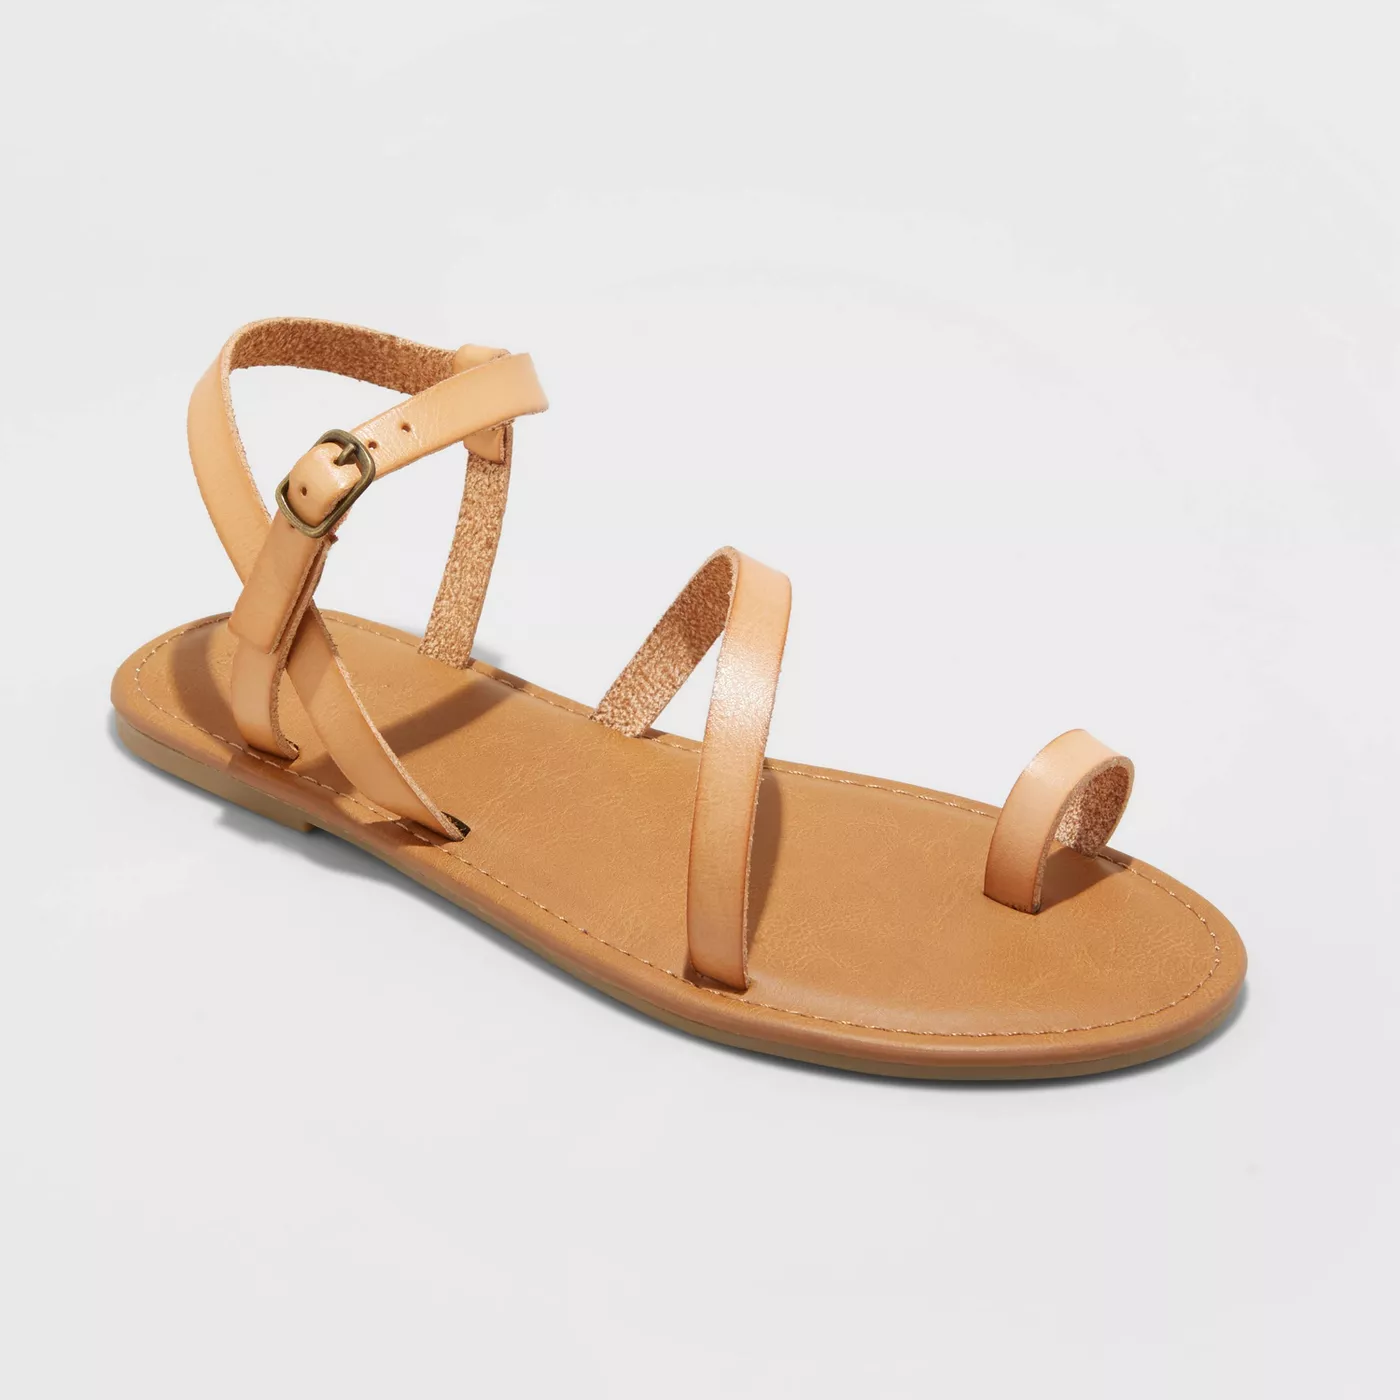 Women's Tera Faux Leather Ankle Strap Sandals - Universal Thread™ - image 1 of 3